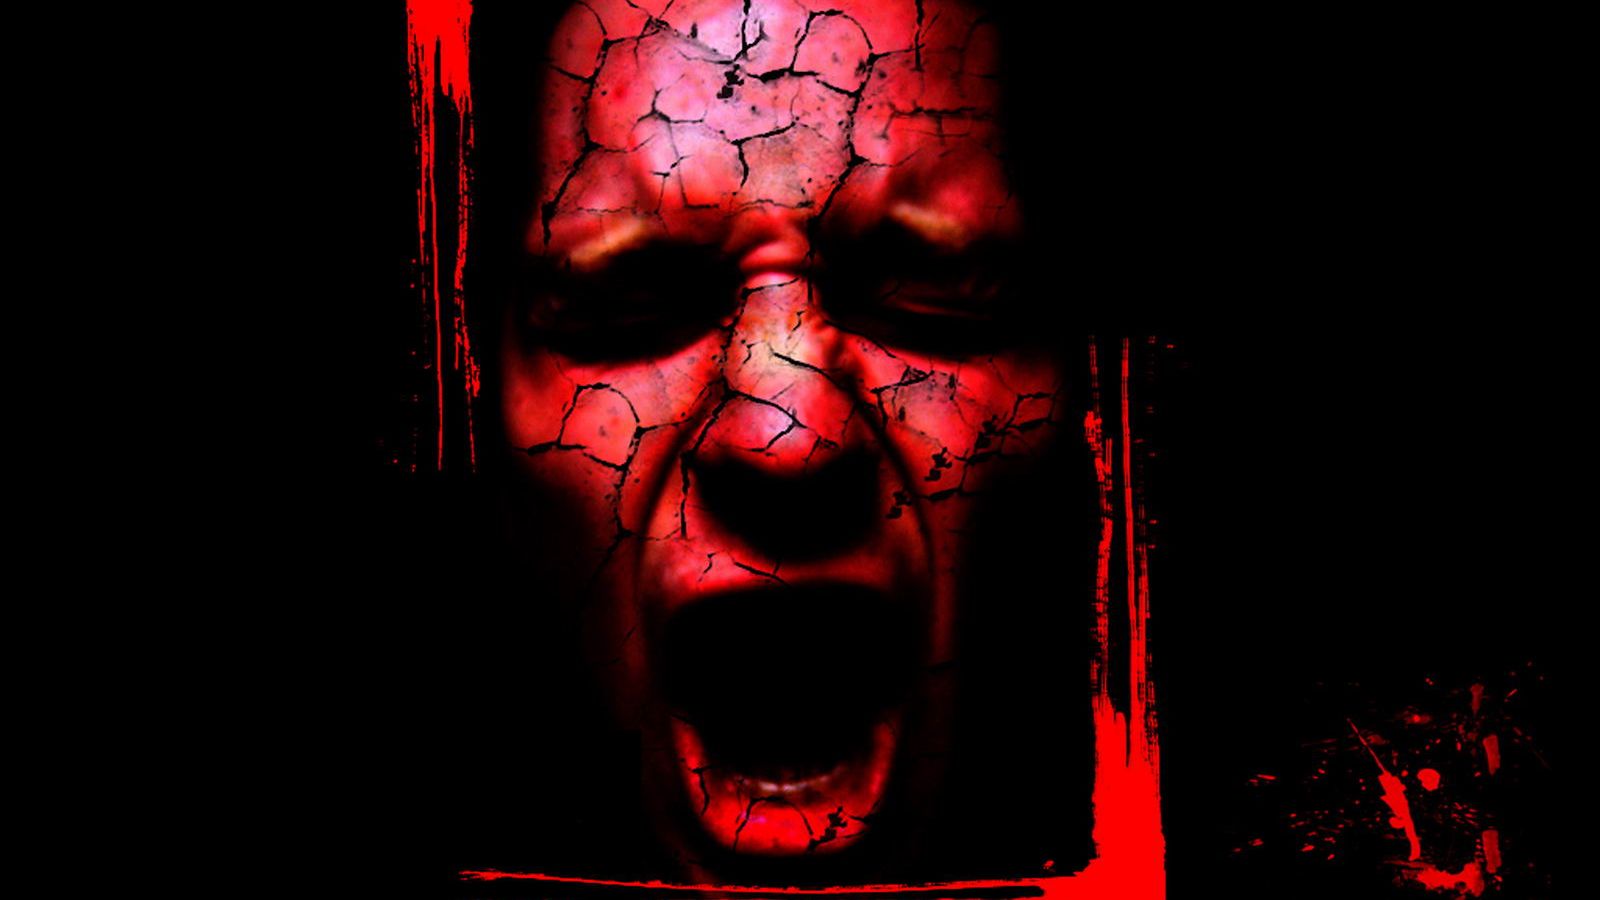 Free download scary wallpaper red grunge scary wallpaper [1600x1200] for your Desktop, Mobile & Tablet. Explore Scary Face Wallpaper. Scary Halloween HD Wallpaper, Scary Animated Halloween Wallpaper, Scary Monster Wallpaper